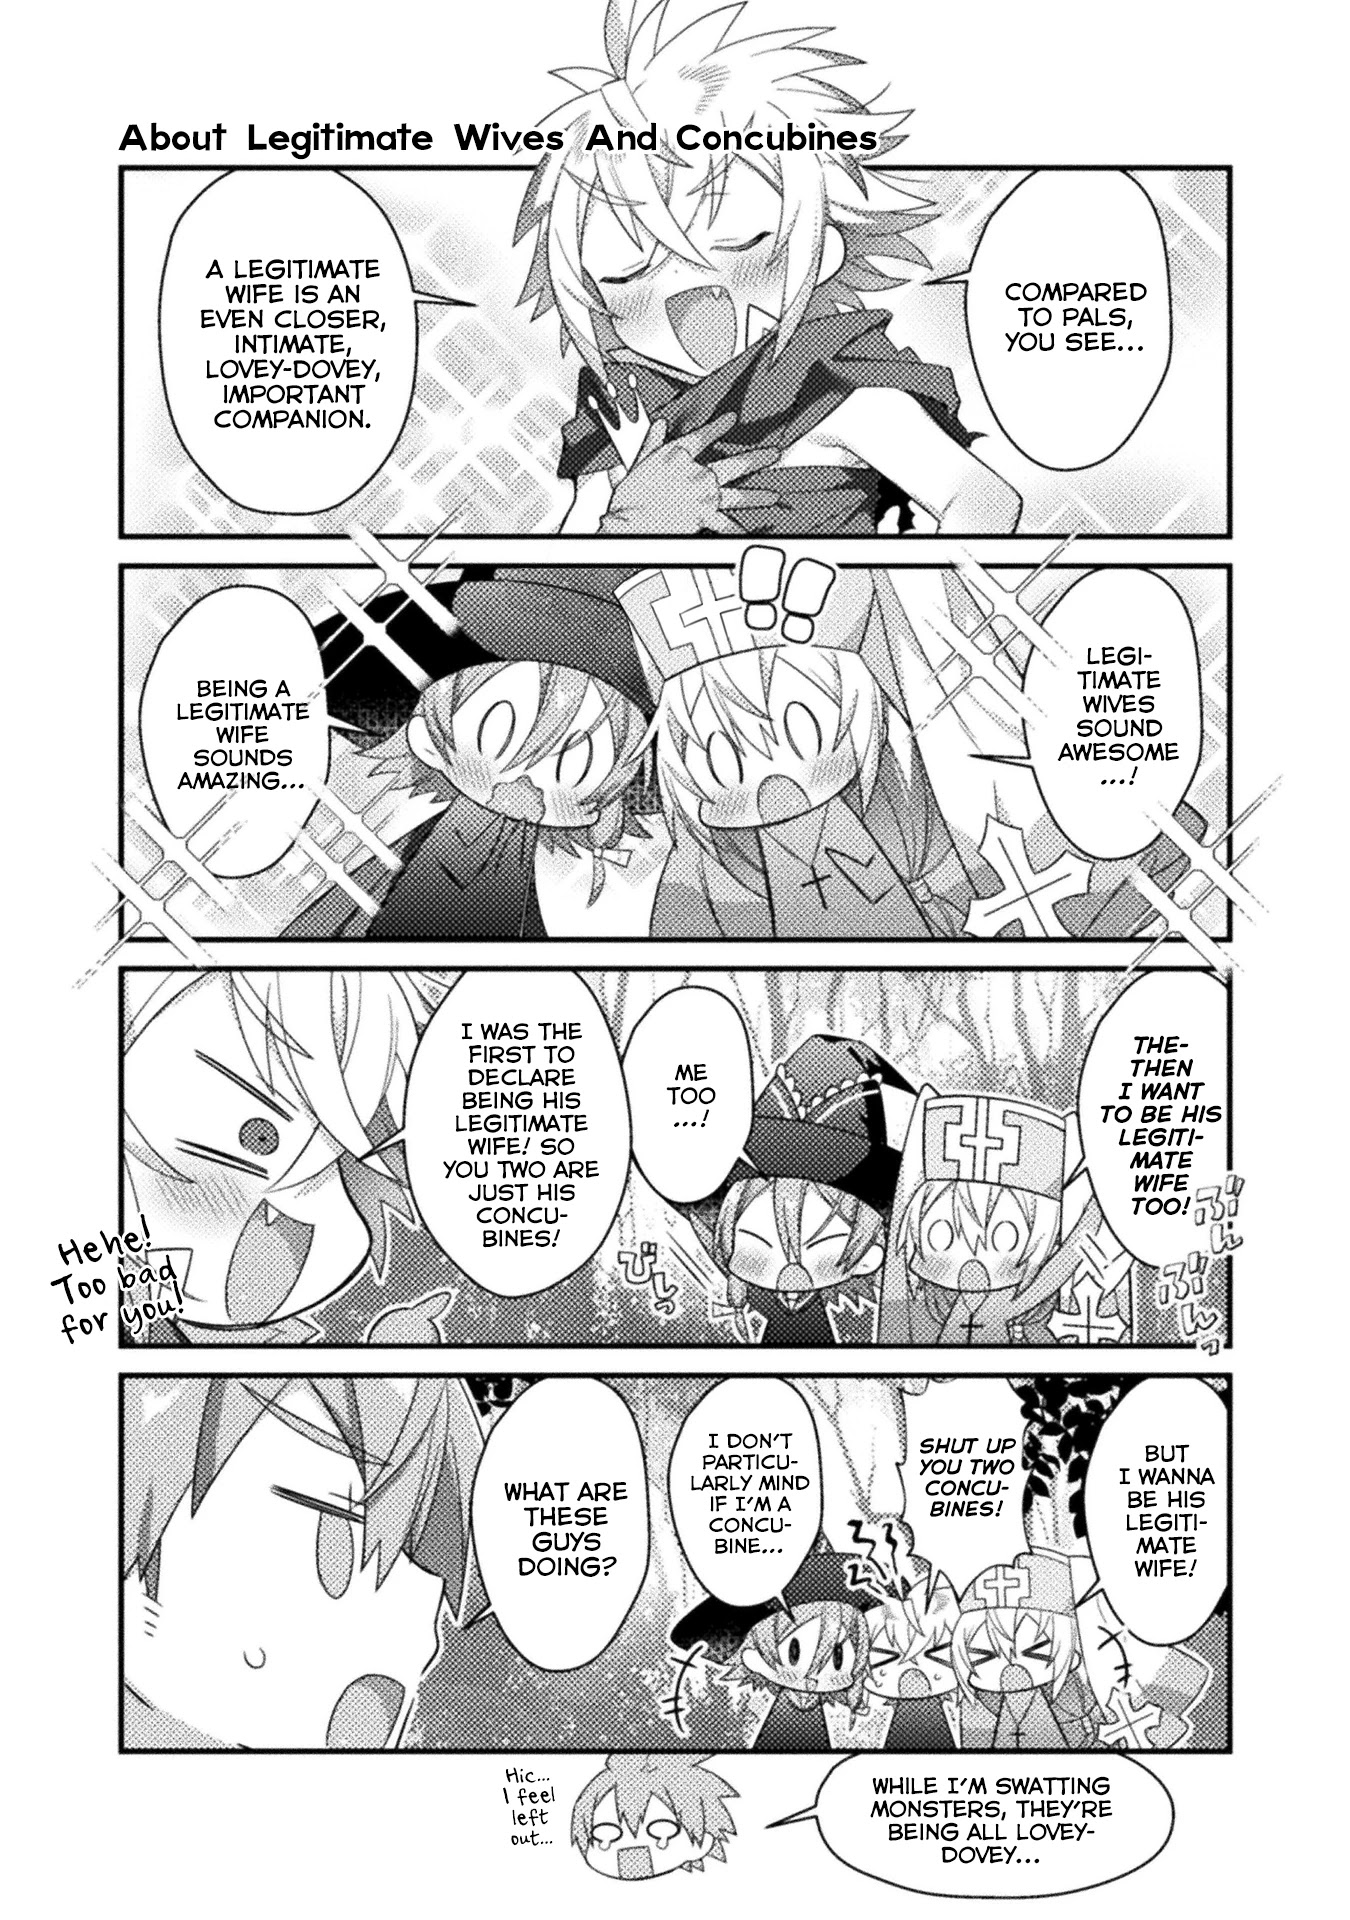 After Reincarnation, My Party Was Full Of Traps, But I'm Not A Shotacon! - 12 page 5